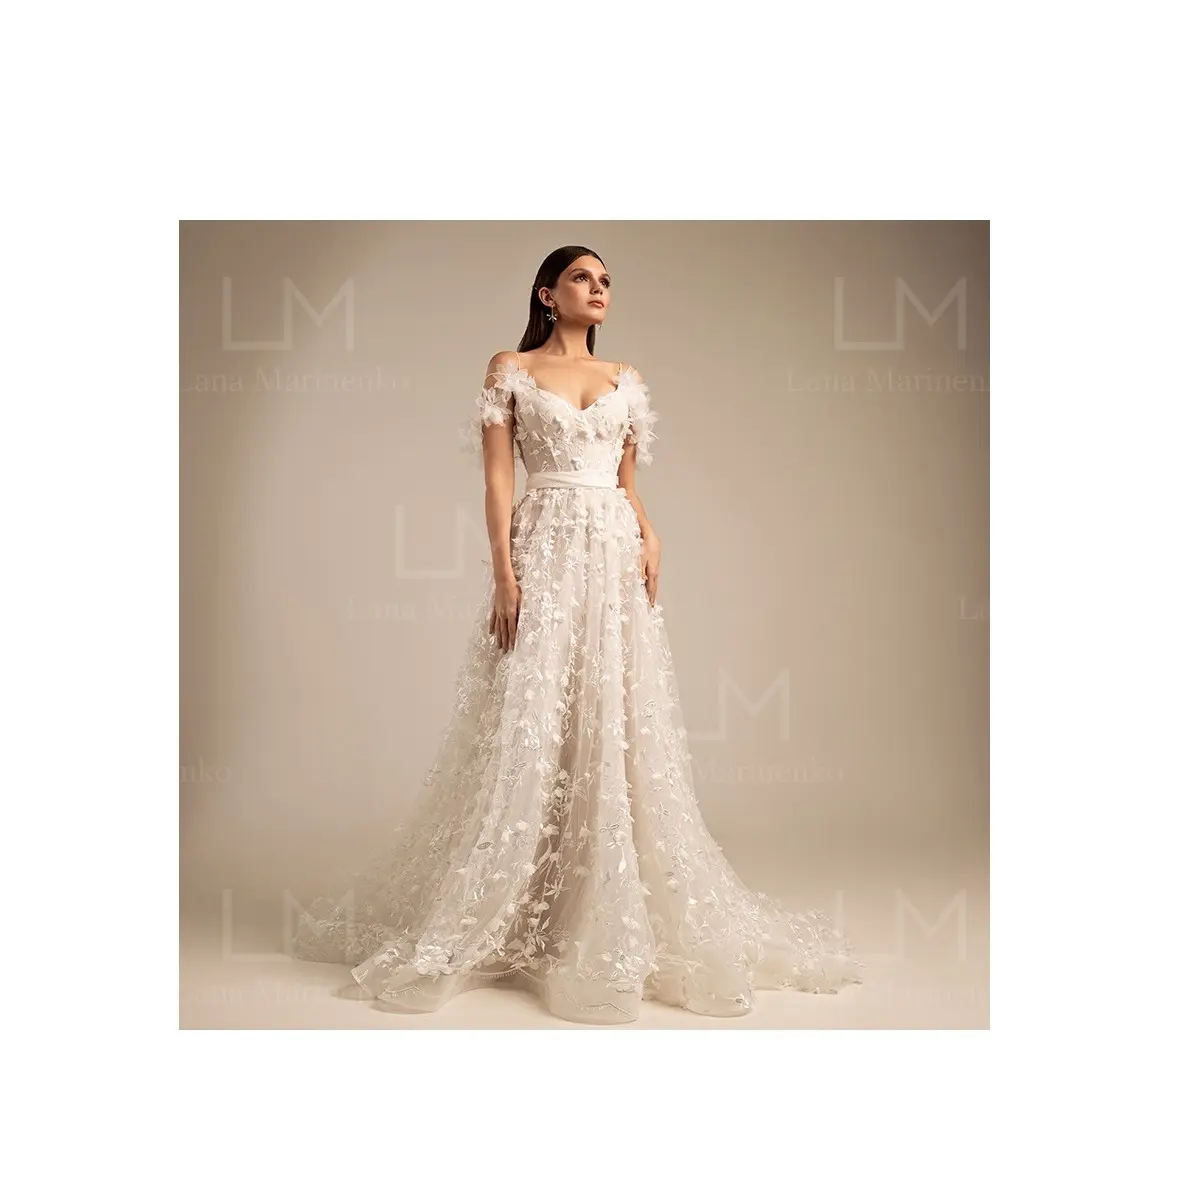 Beautiful flower lace tulle fabric with lace open back A-line "Flora" wedding dress with detachable sleeves and train for bride